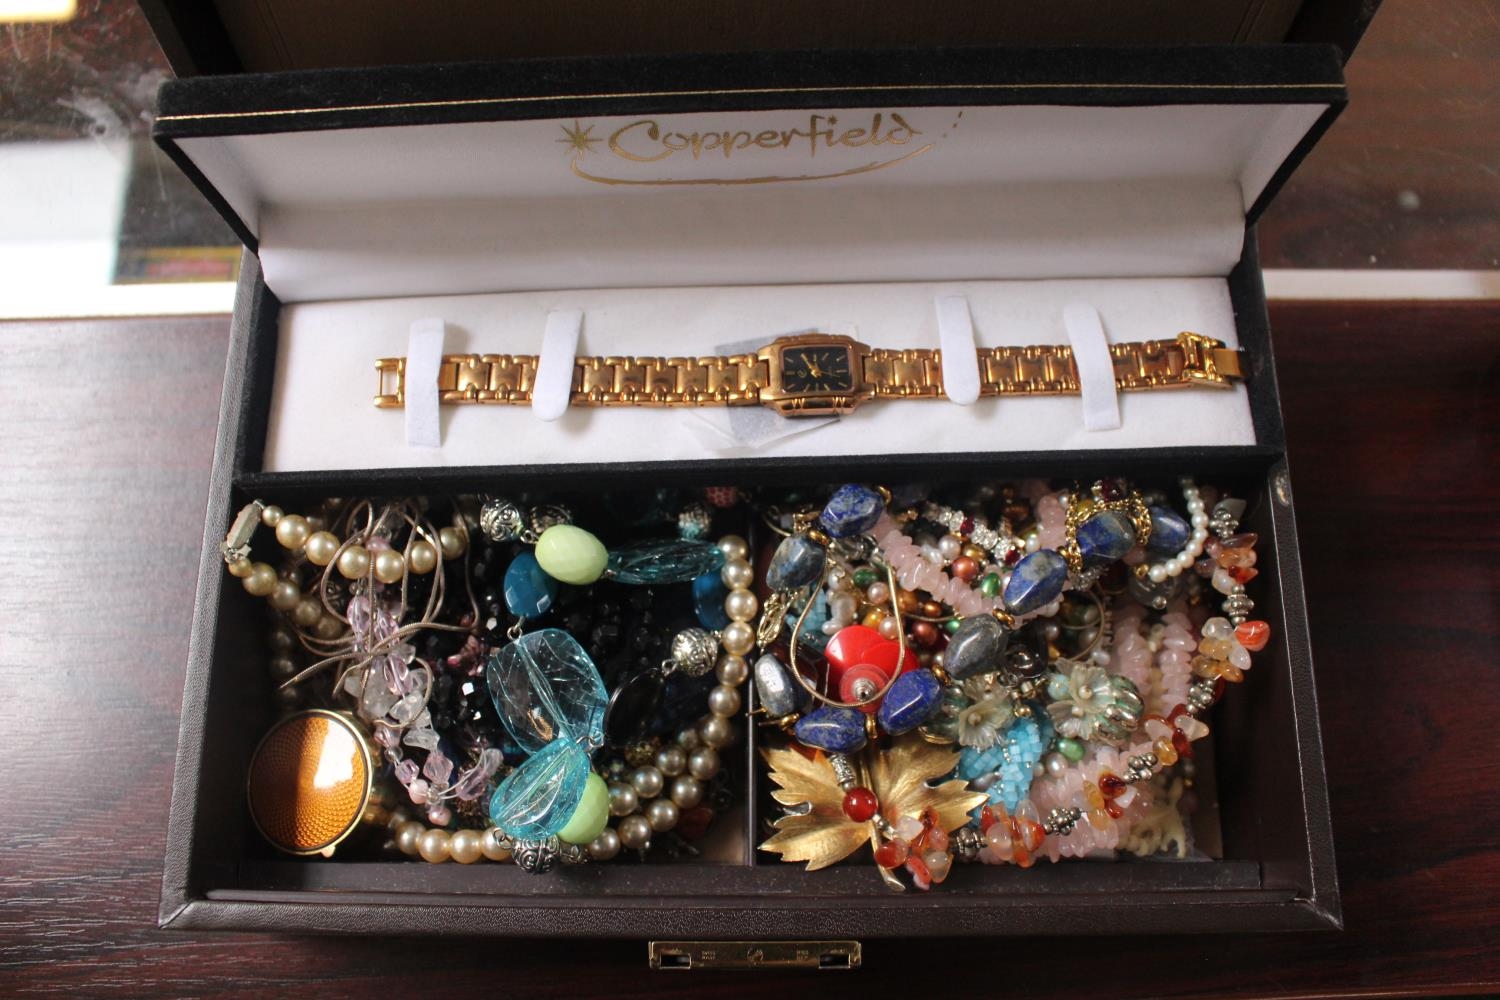 Box of assorted Costume jewellery inc Necklaces, Earrings, Wristwatch etc